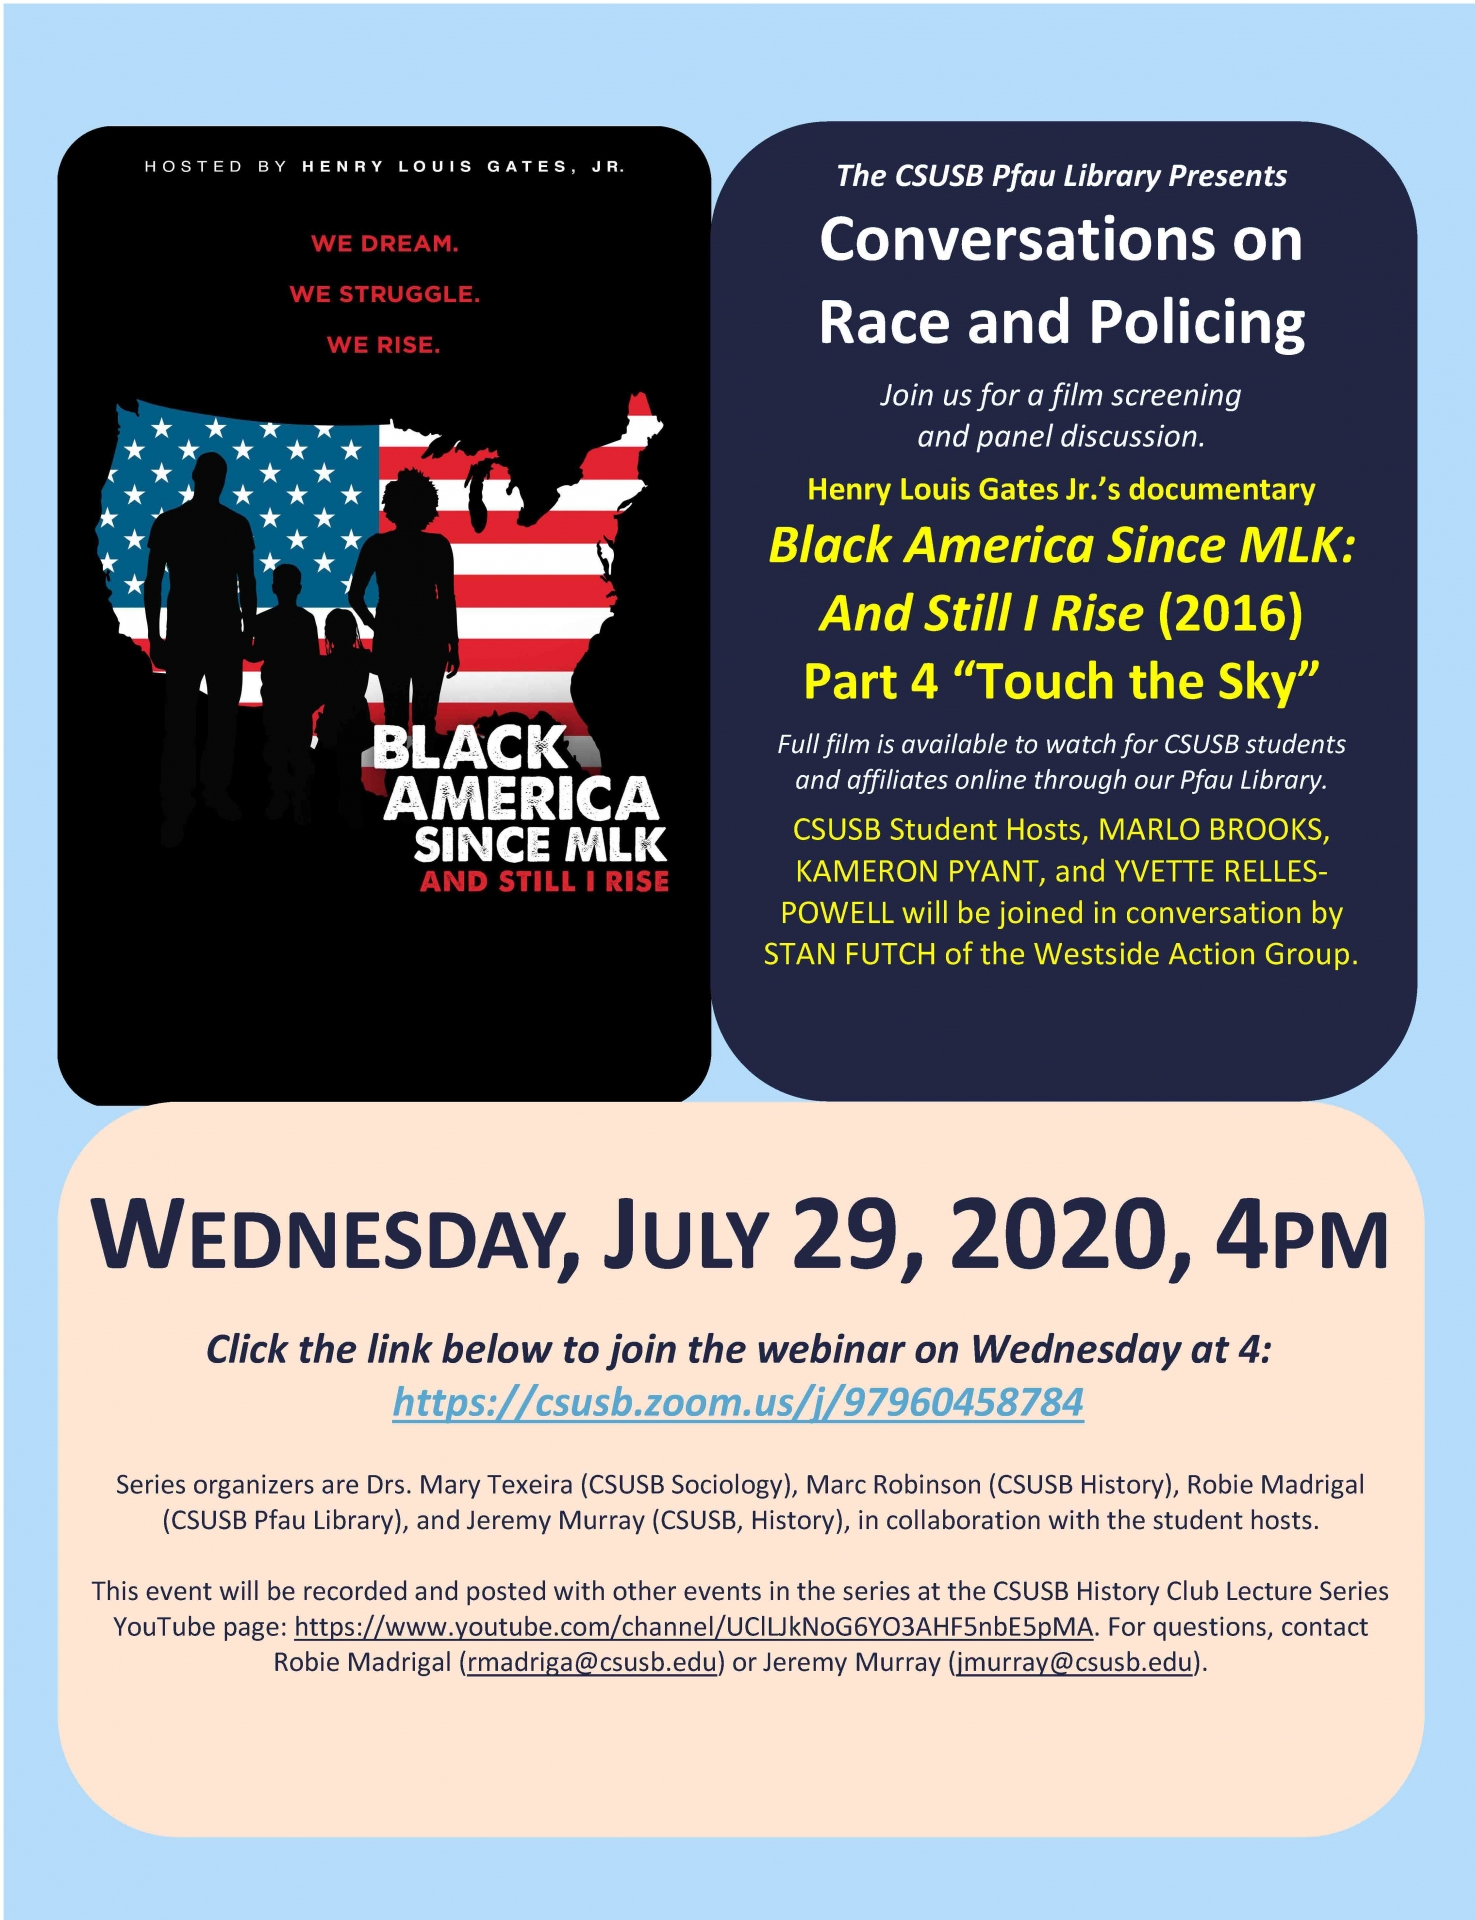 Part 4 of the documentary ‘Black America Since MLK: And Still I Rise,’ focus of next Conversations on Race and Policing